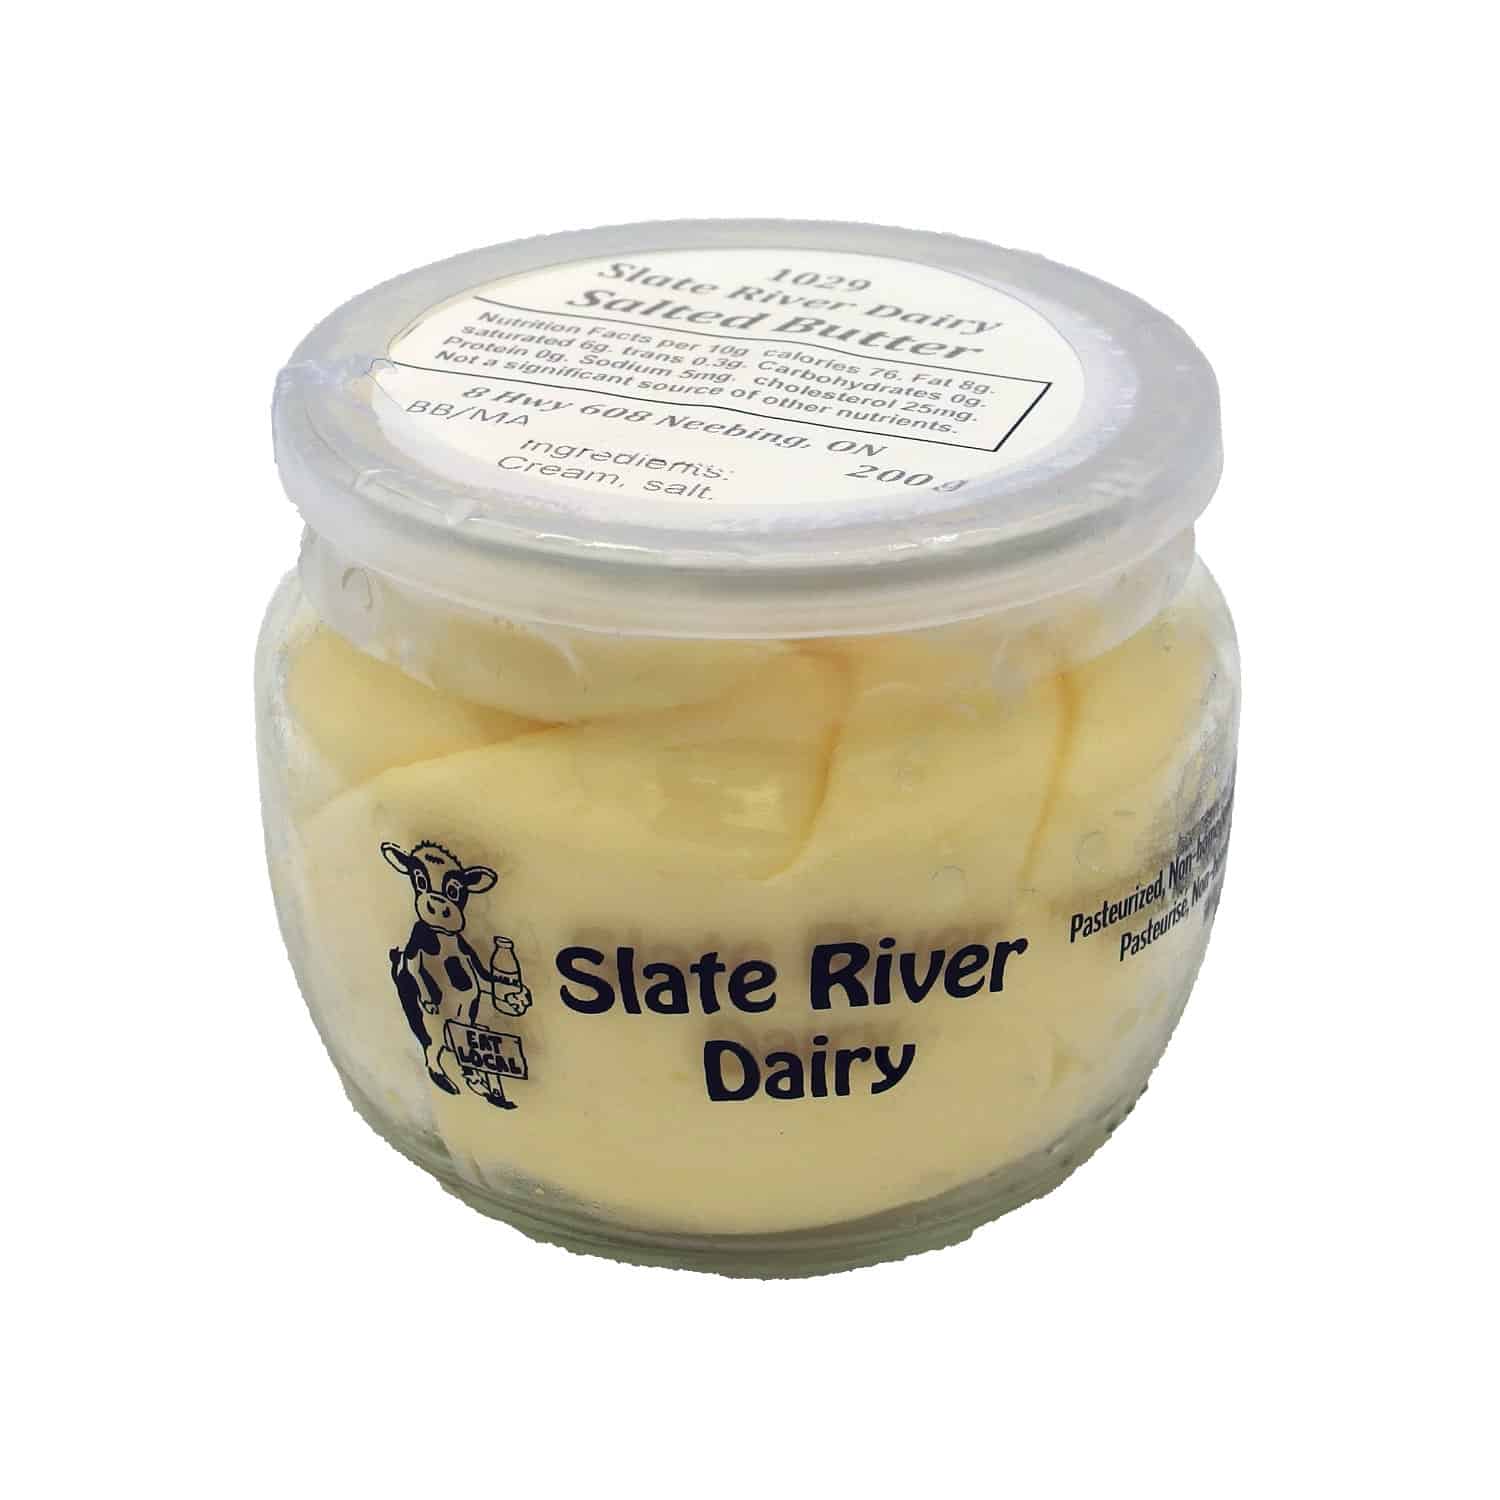 Salted Butter from Slate River Dairy